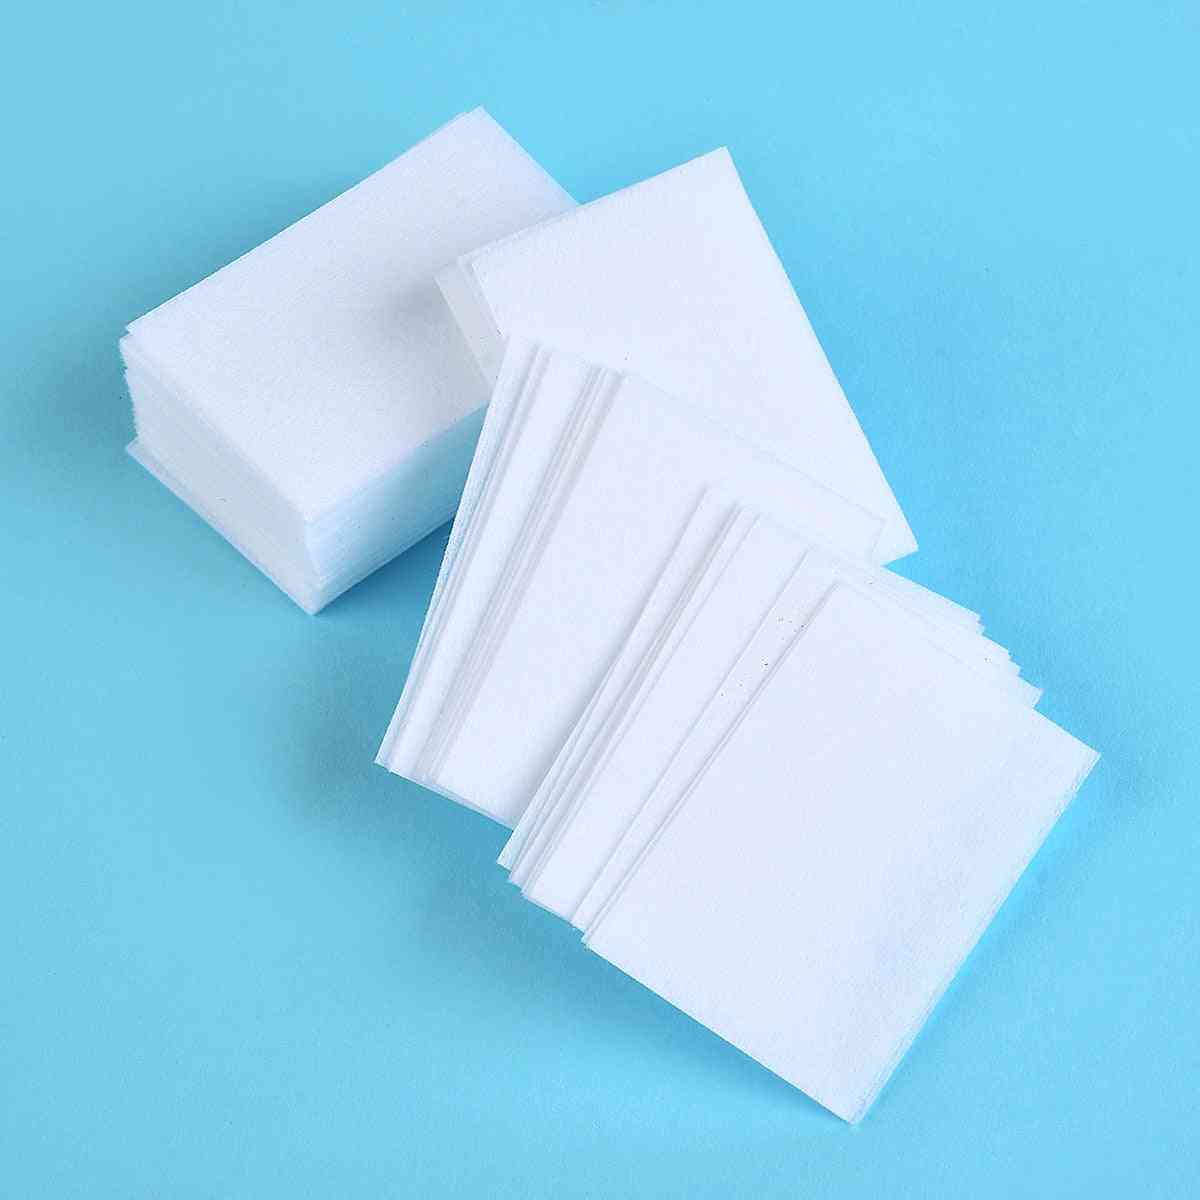 Nail Polish Remover Wipes, Manicure Gel Lint-free Napkins